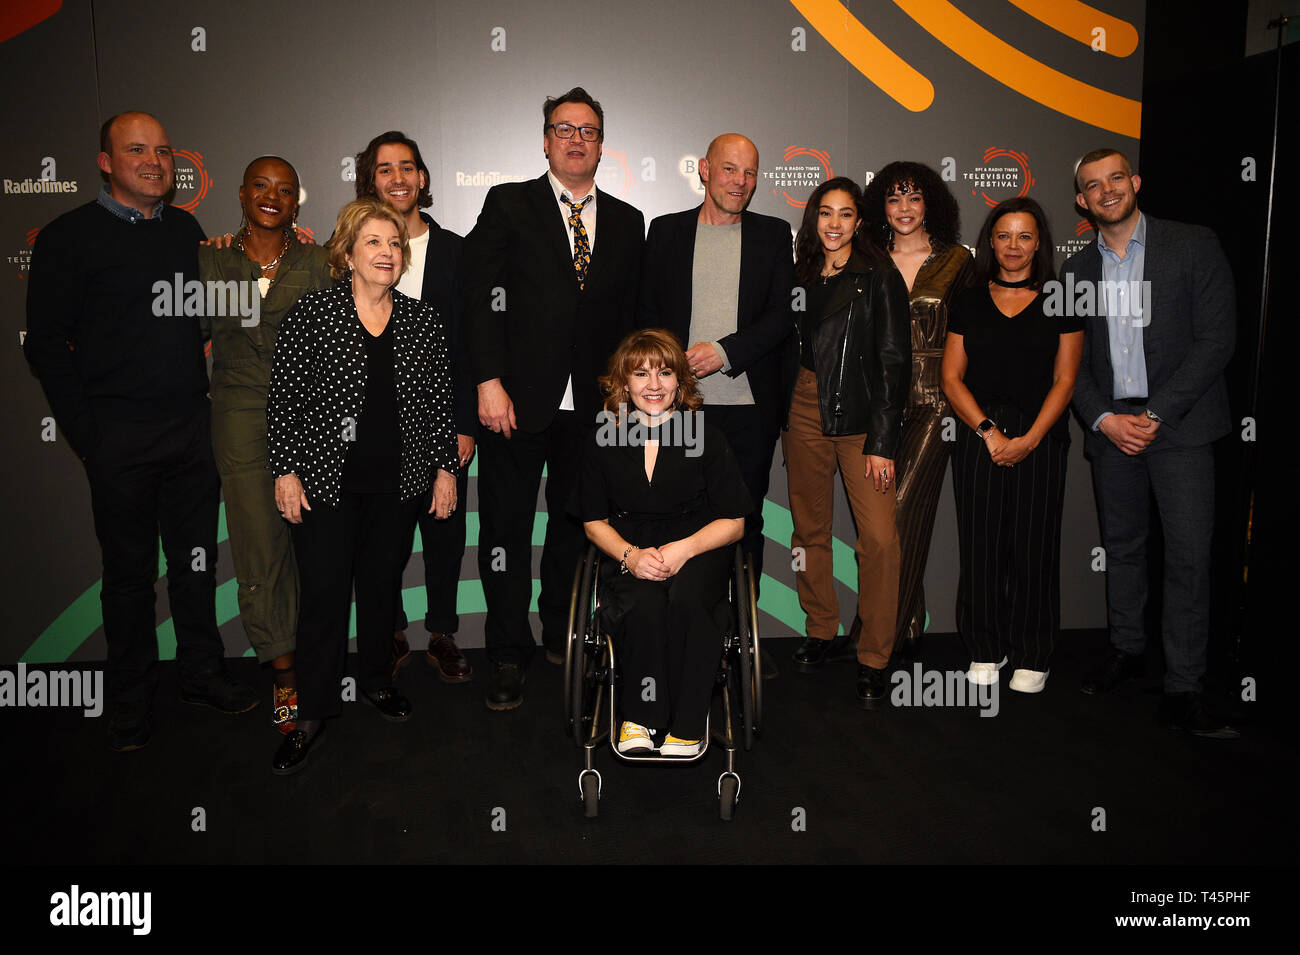 (left to right) Rory Kinnear, T'nia Miller, Anne Reid, Maxim Baldry, Russell T Davies, Ruth Madeley, Simon Cellan Jones, Jade Alleyne, Lydia West, Nicola Shindler and Russell Tovey at a photo call for Years and Years during the BFI and Radio Times Television Festival at the BFI Southbank, London. Stock Photo